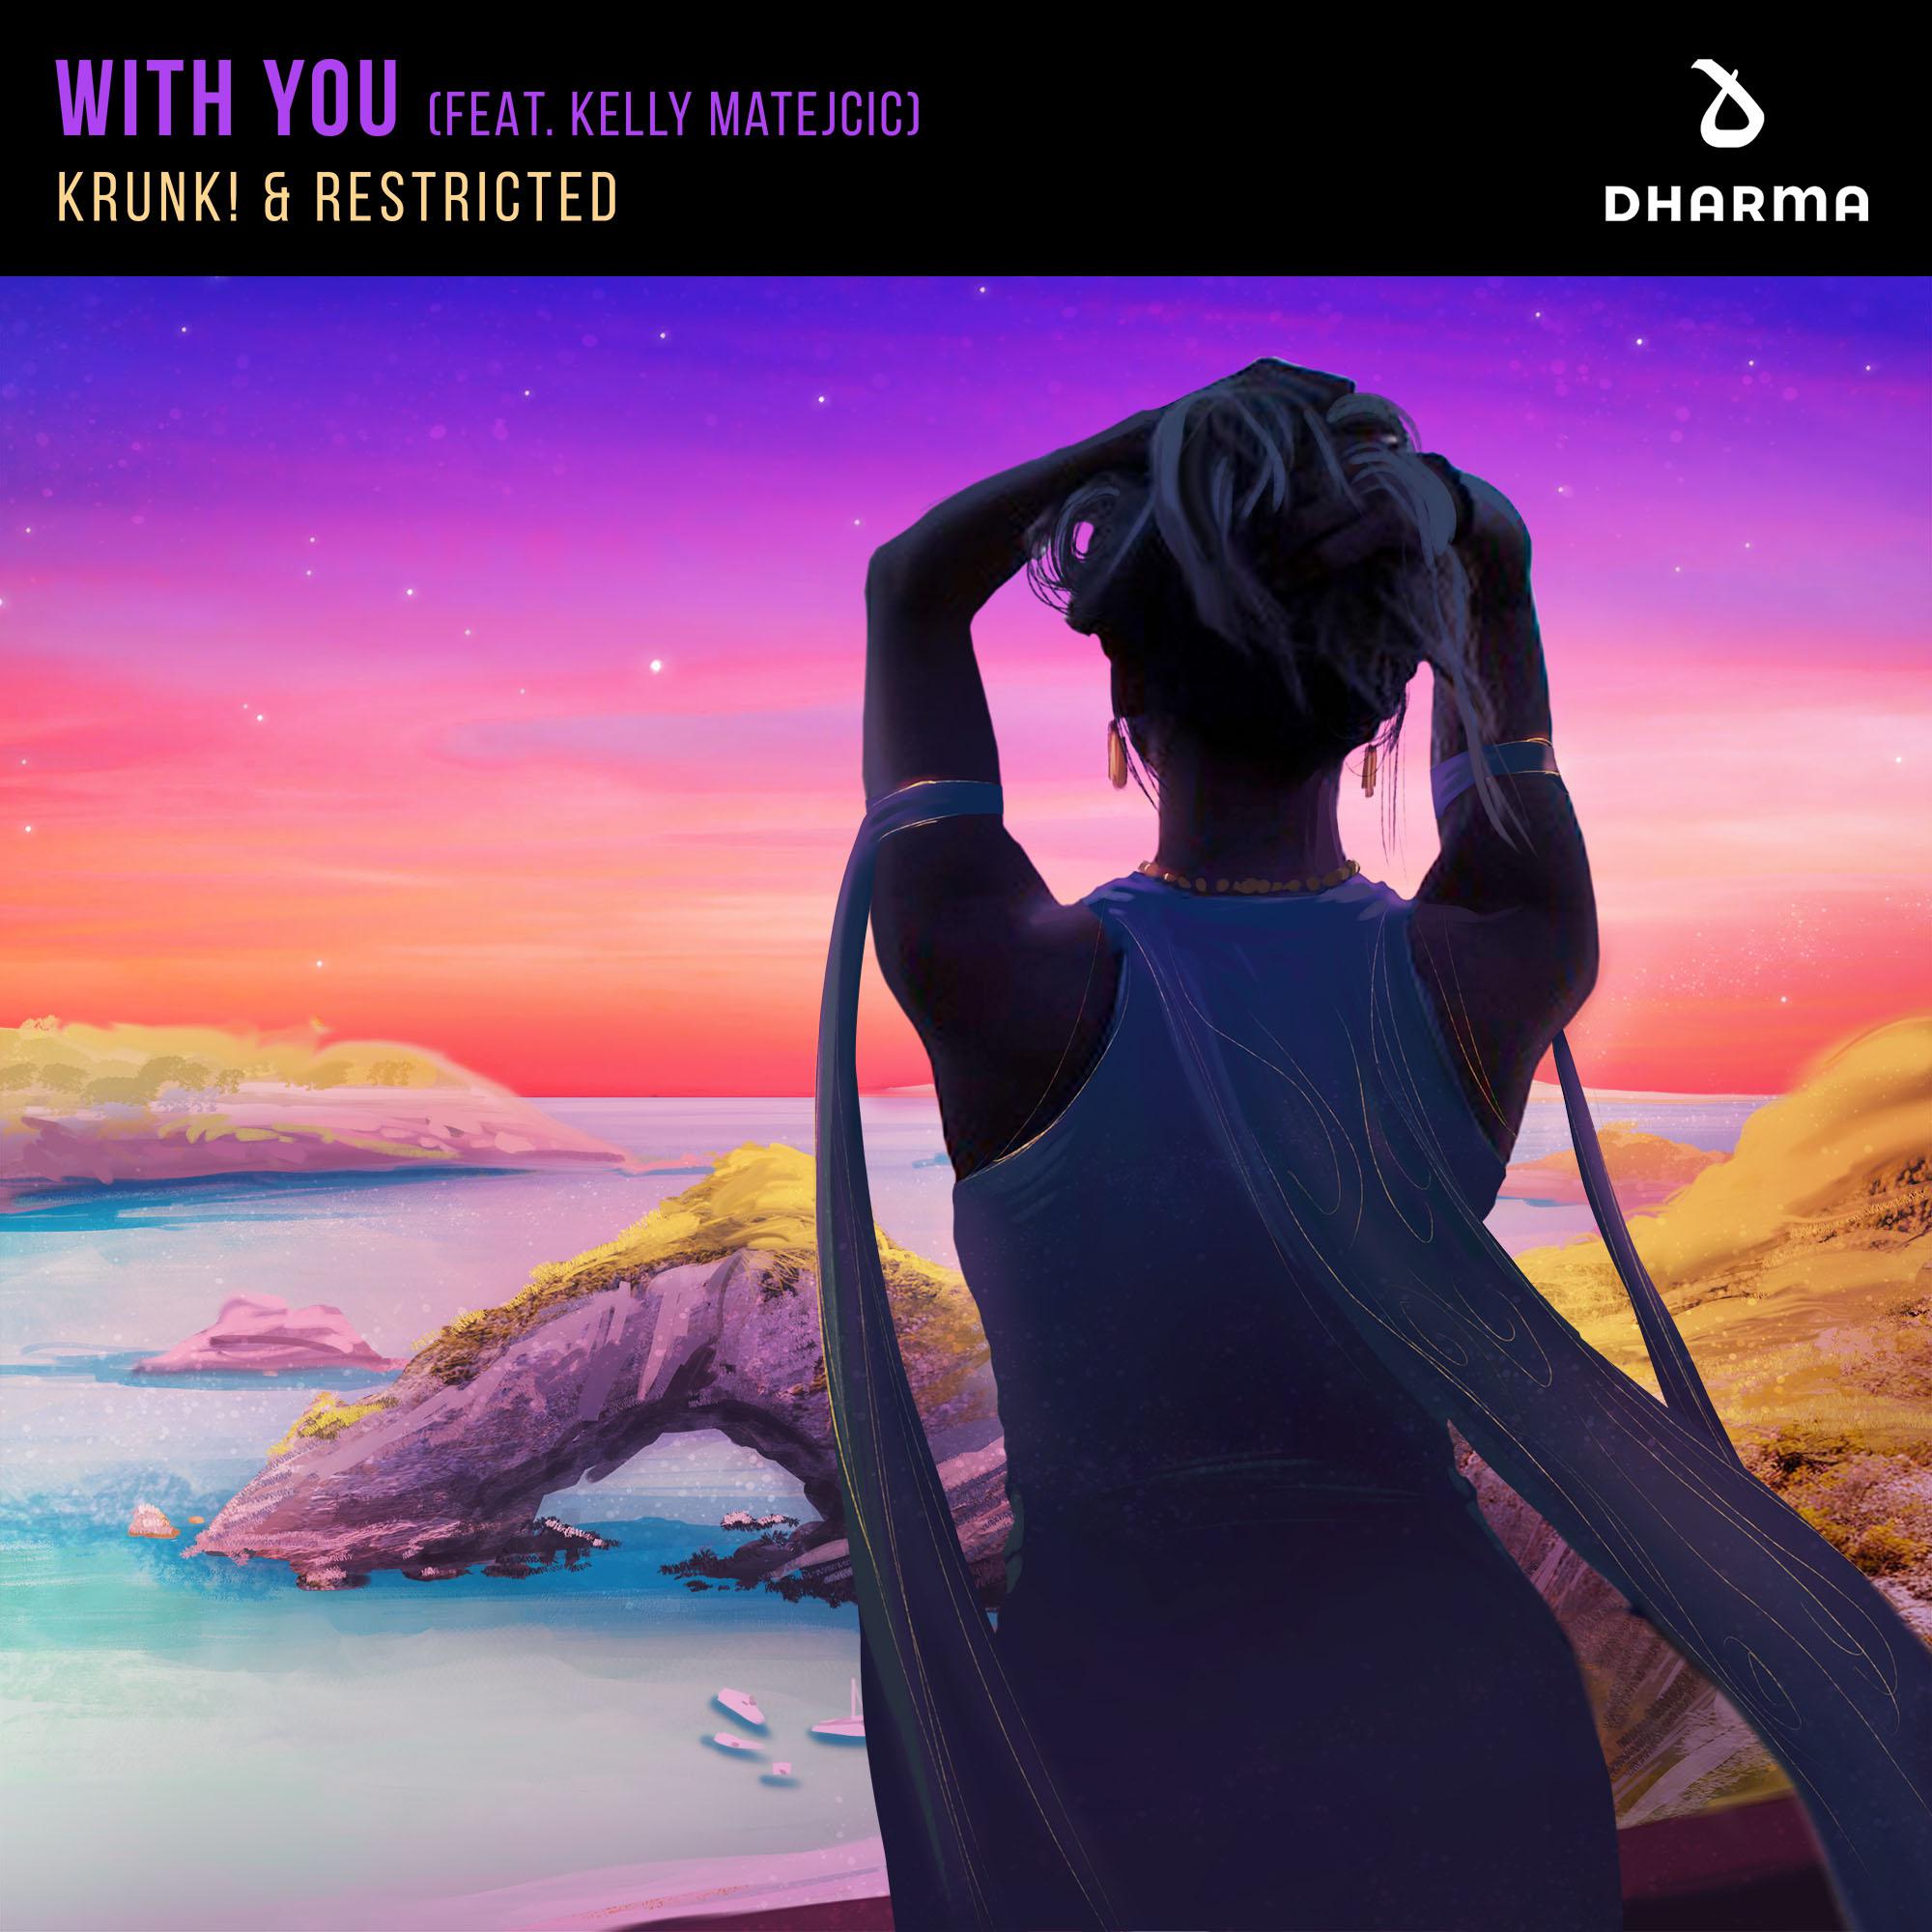 Krunk! - With You (feat. Kelly Matejcic)